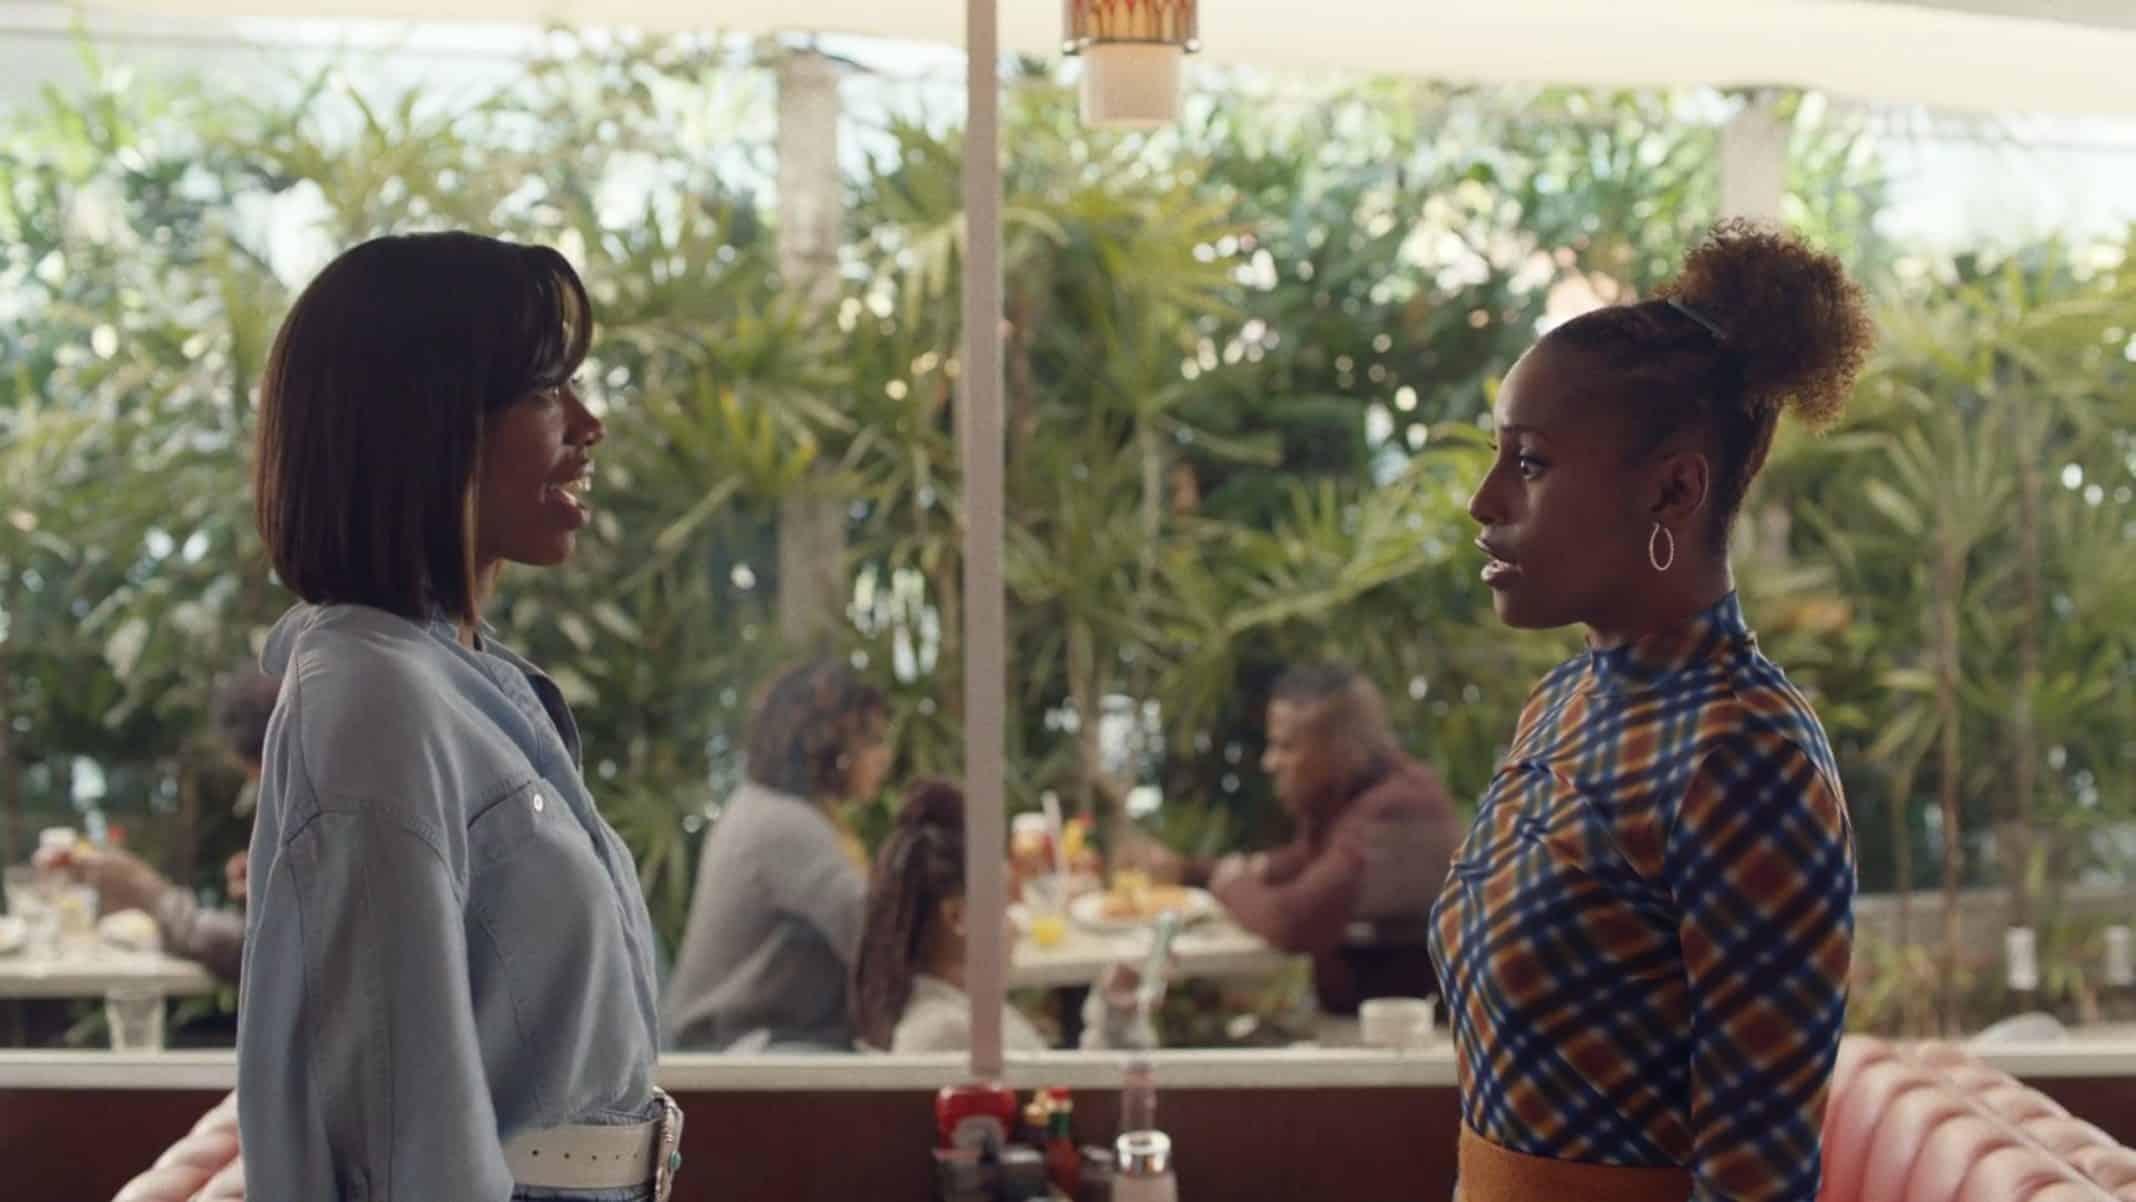 Insecure: Season 4 Episode 9 “Lowkey Trying” – Recap/ Review with Spoilers